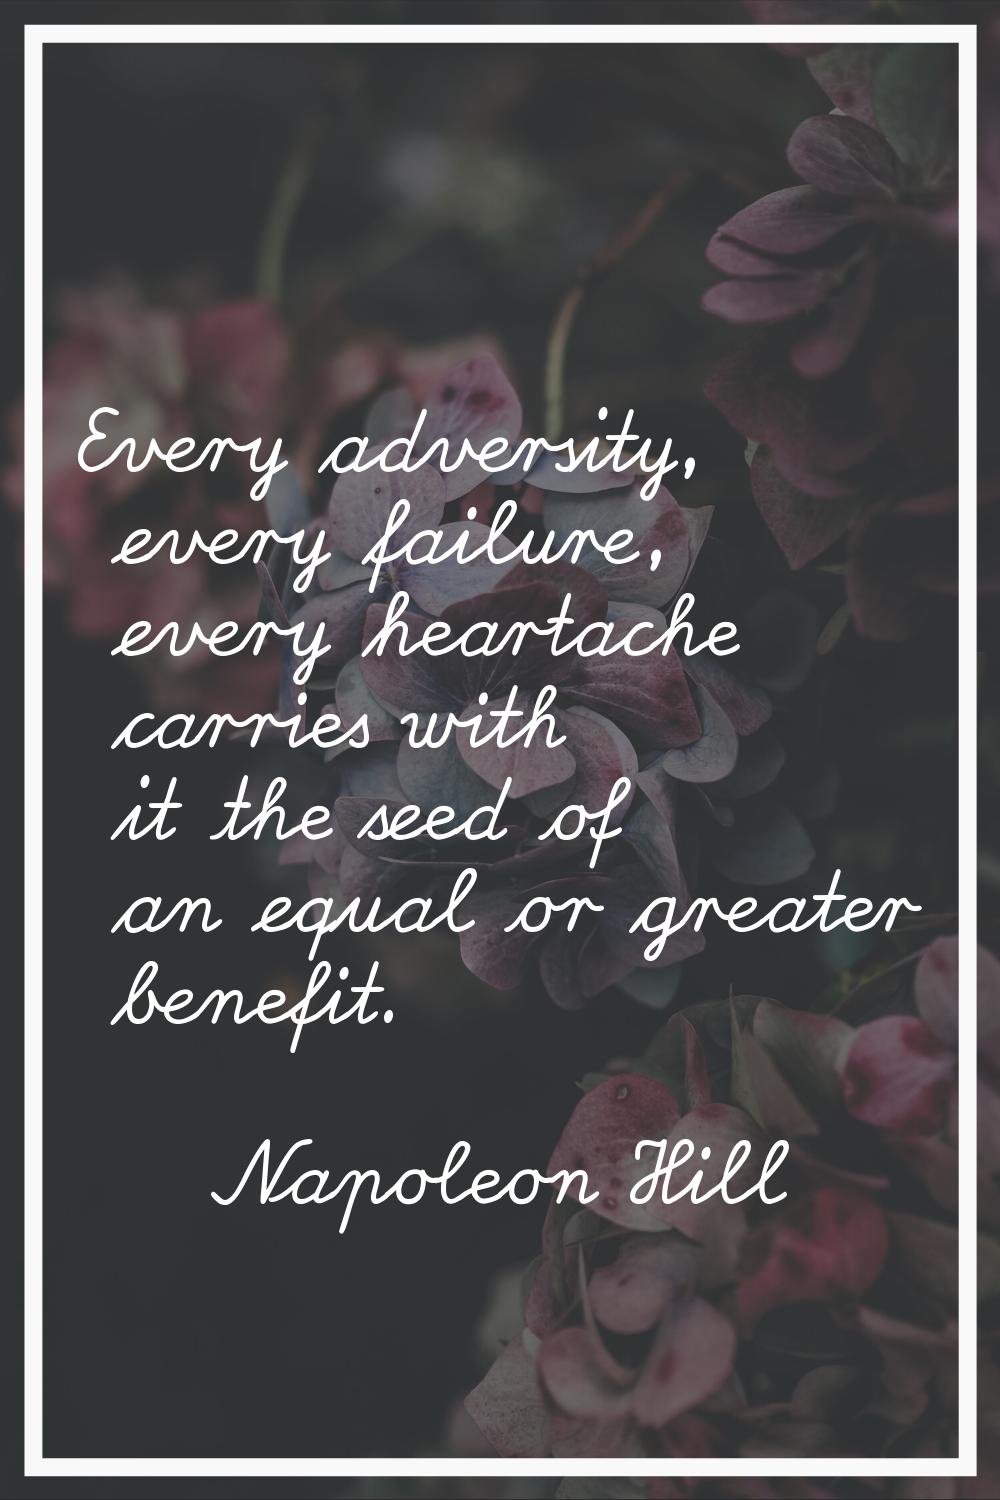 Every adversity, every failure, every heartache carries with it the seed of an equal or greater ben